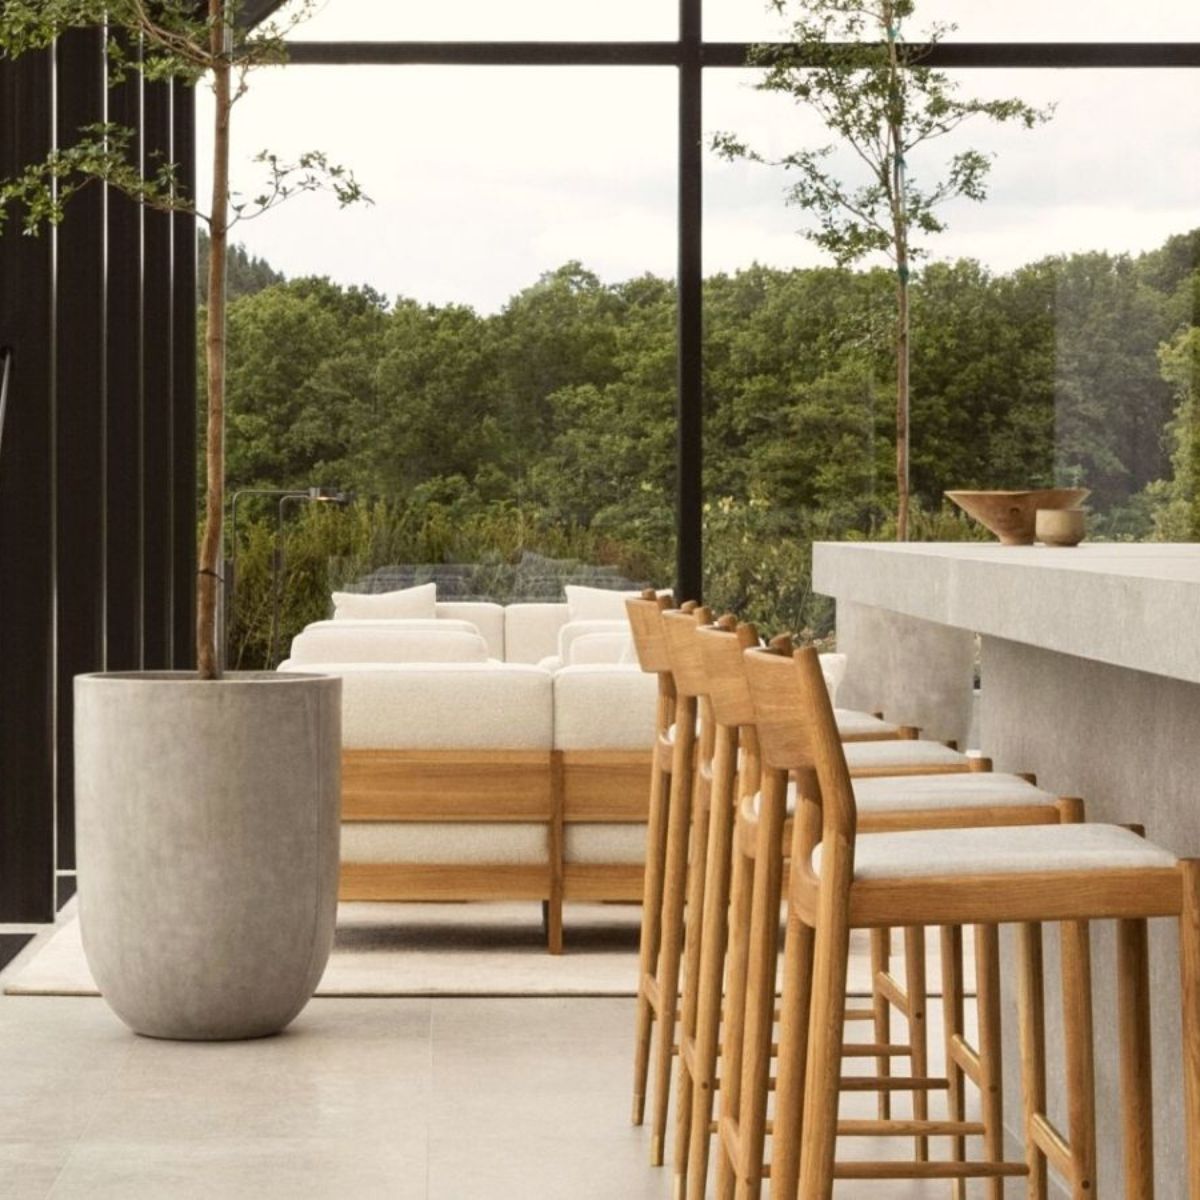 danish-architect-studio-norm-has-completed-ang-a-michelin-starred-restaurant-in-swedish-meadows-featured